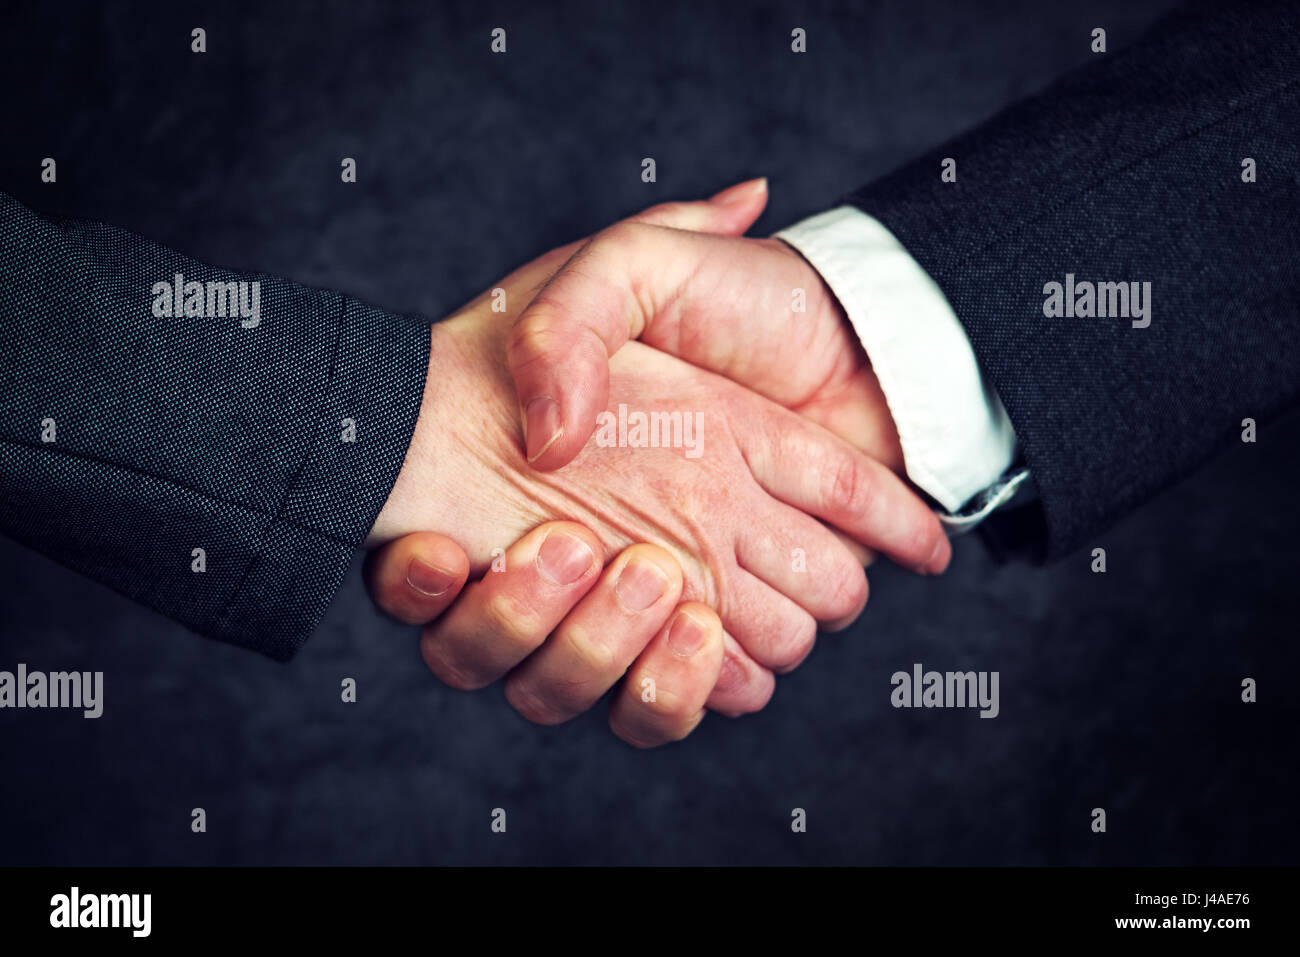 Joint enterprise handshake over business agreement, male and female businesspeople shaking hands after forming a strategic partnership Stock Photo